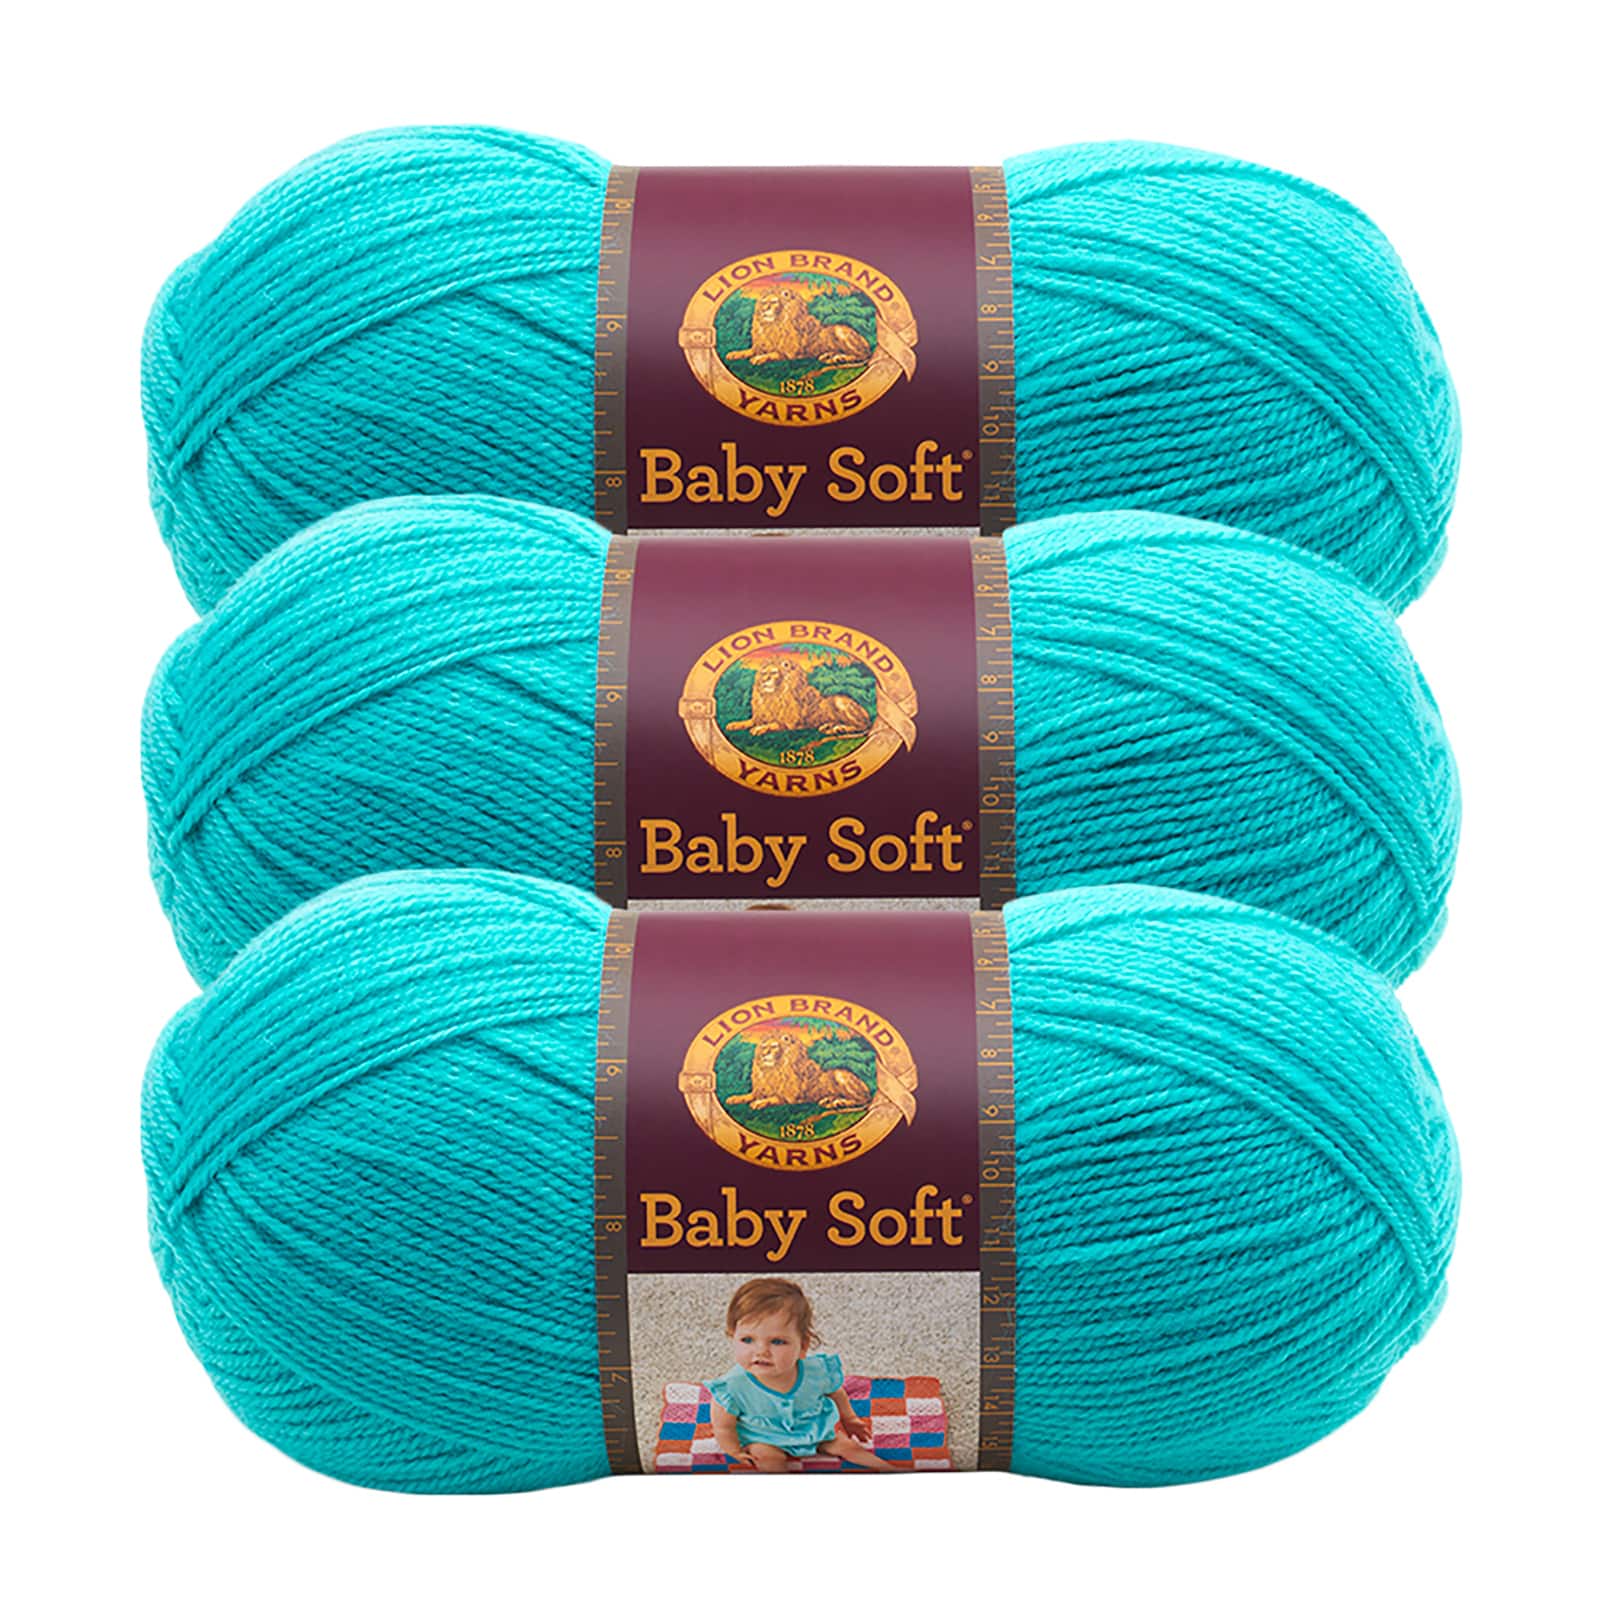 Lion Brand Baby Soft Yarn-Circus Print, Multipack Of 6 